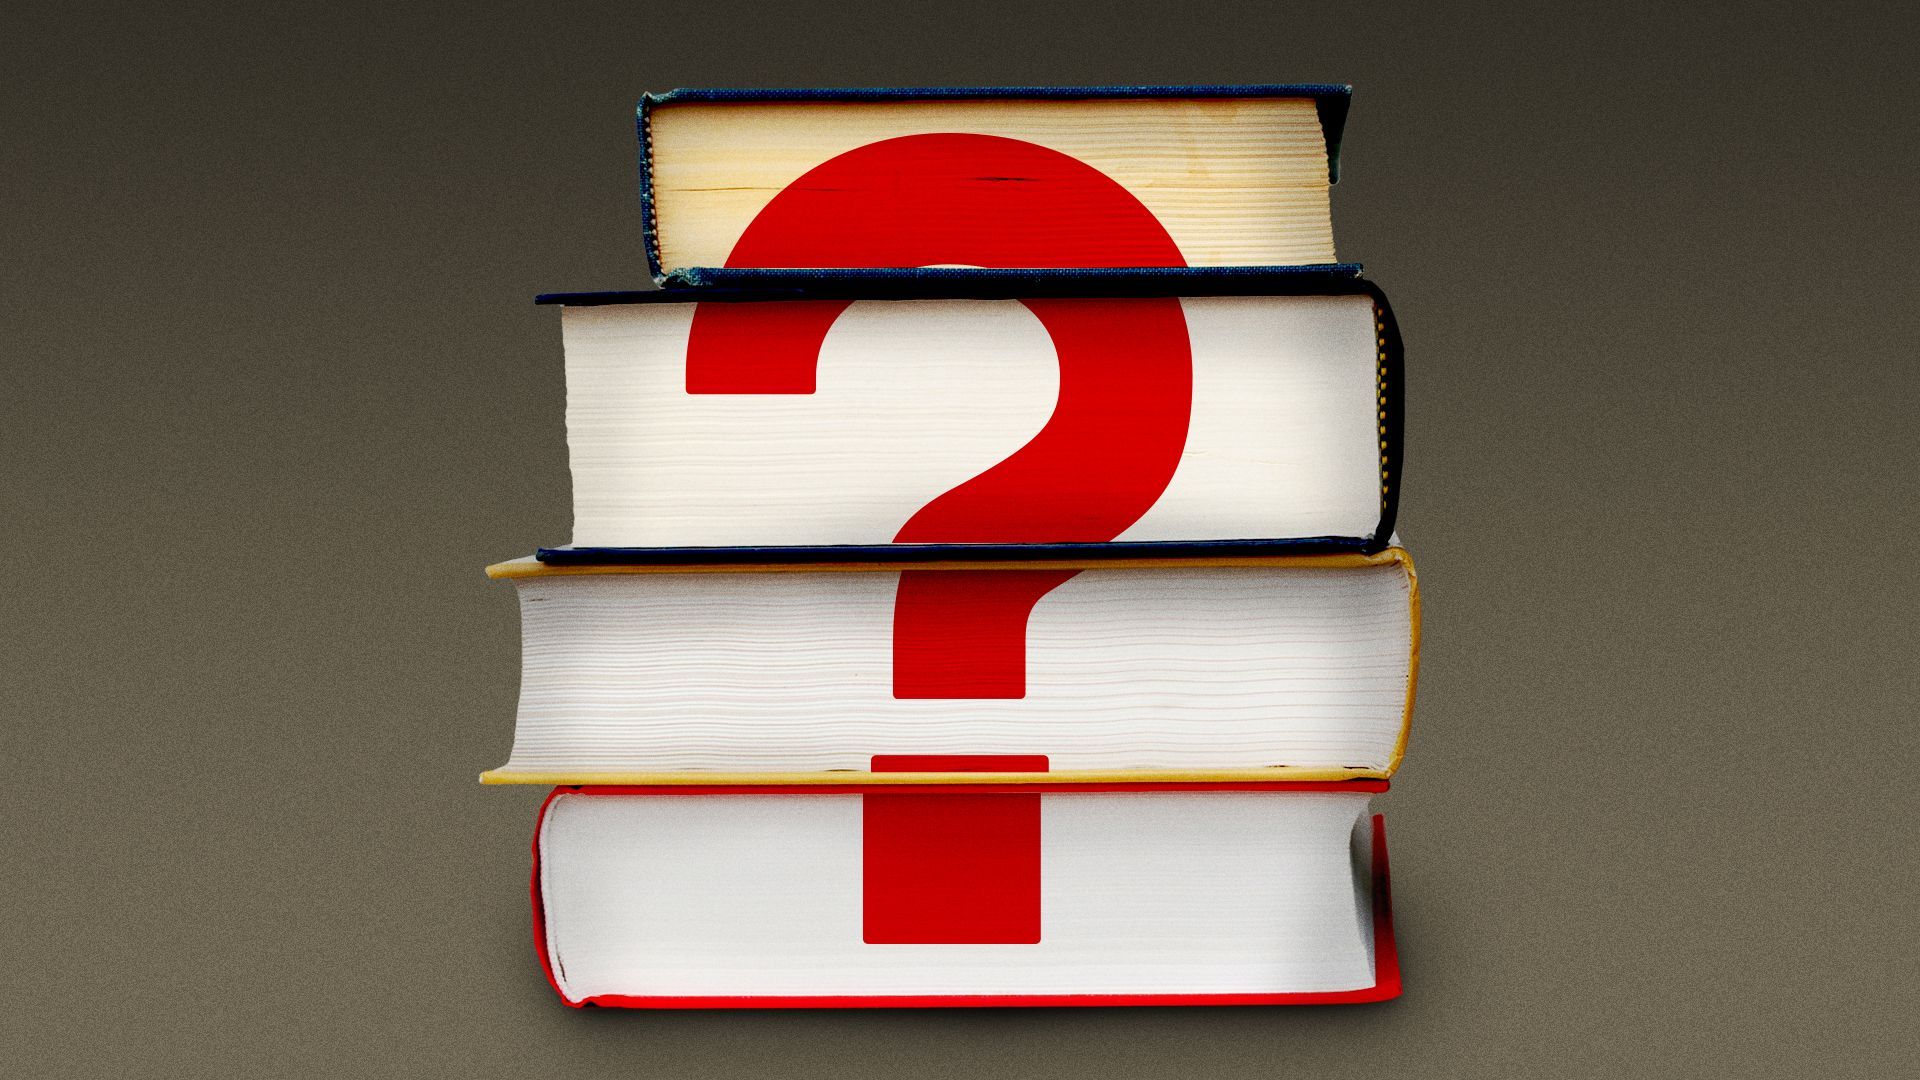 Illustration of a stack of books with a question mark printed on the pages.